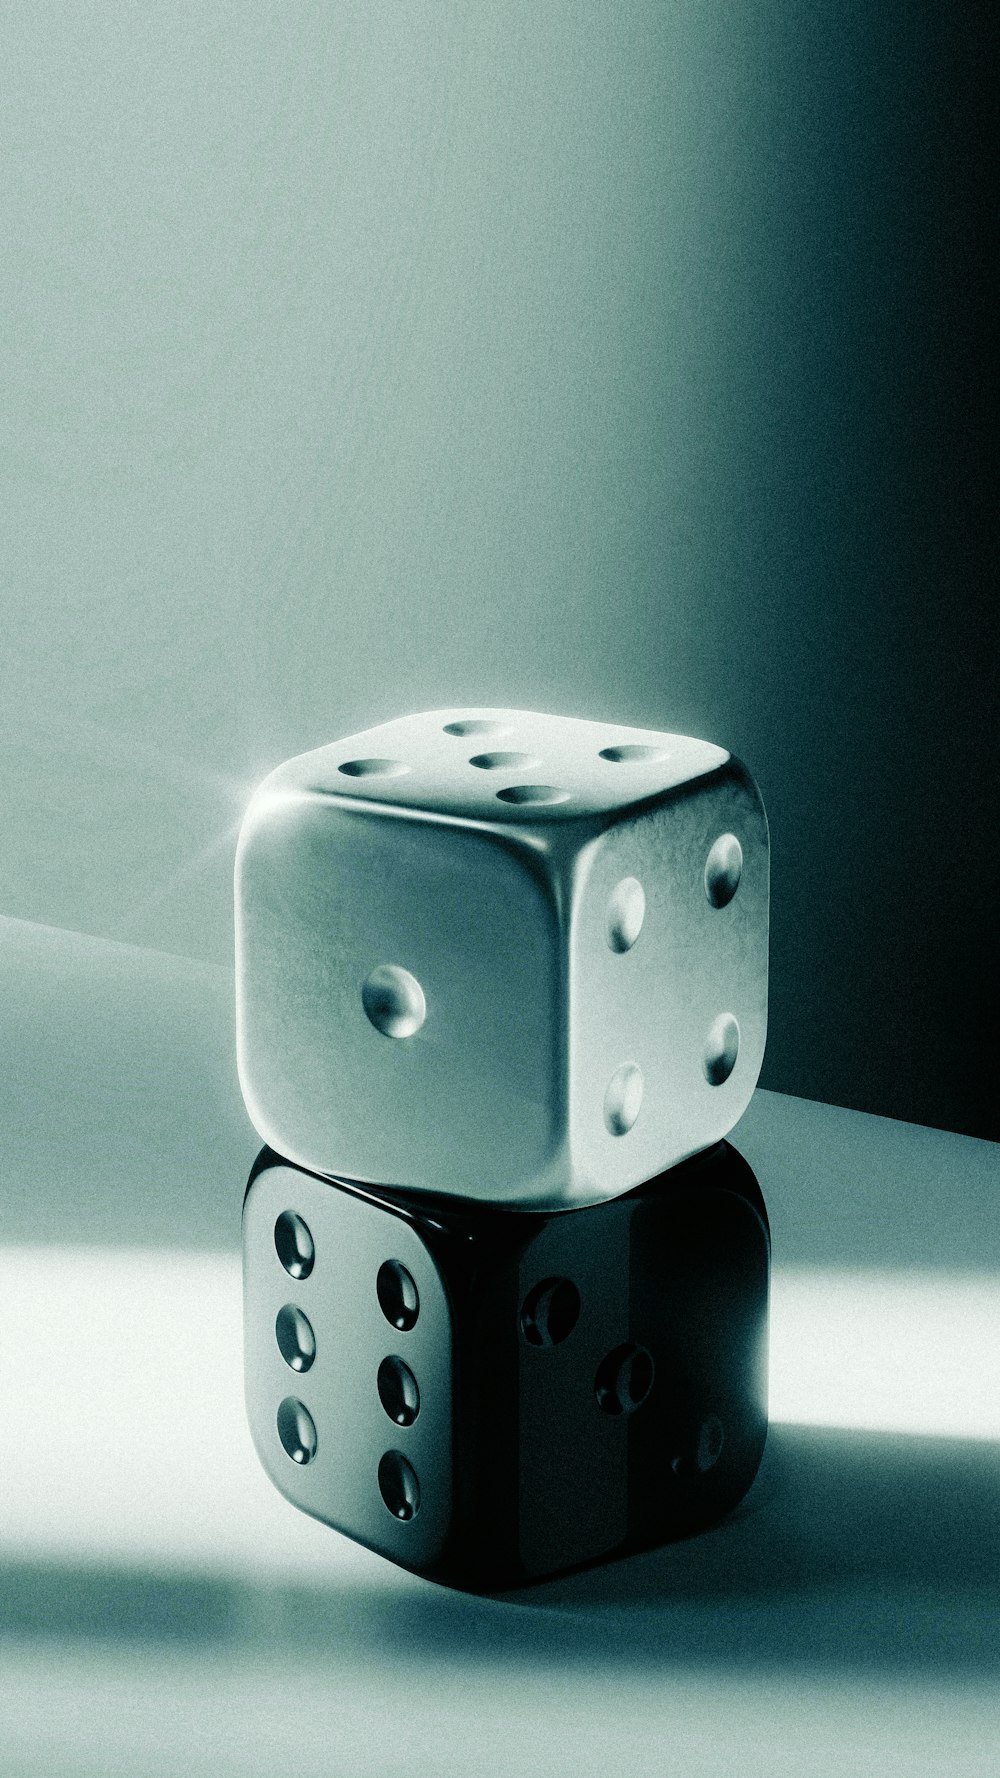 two dices sitting on top of each other on a table